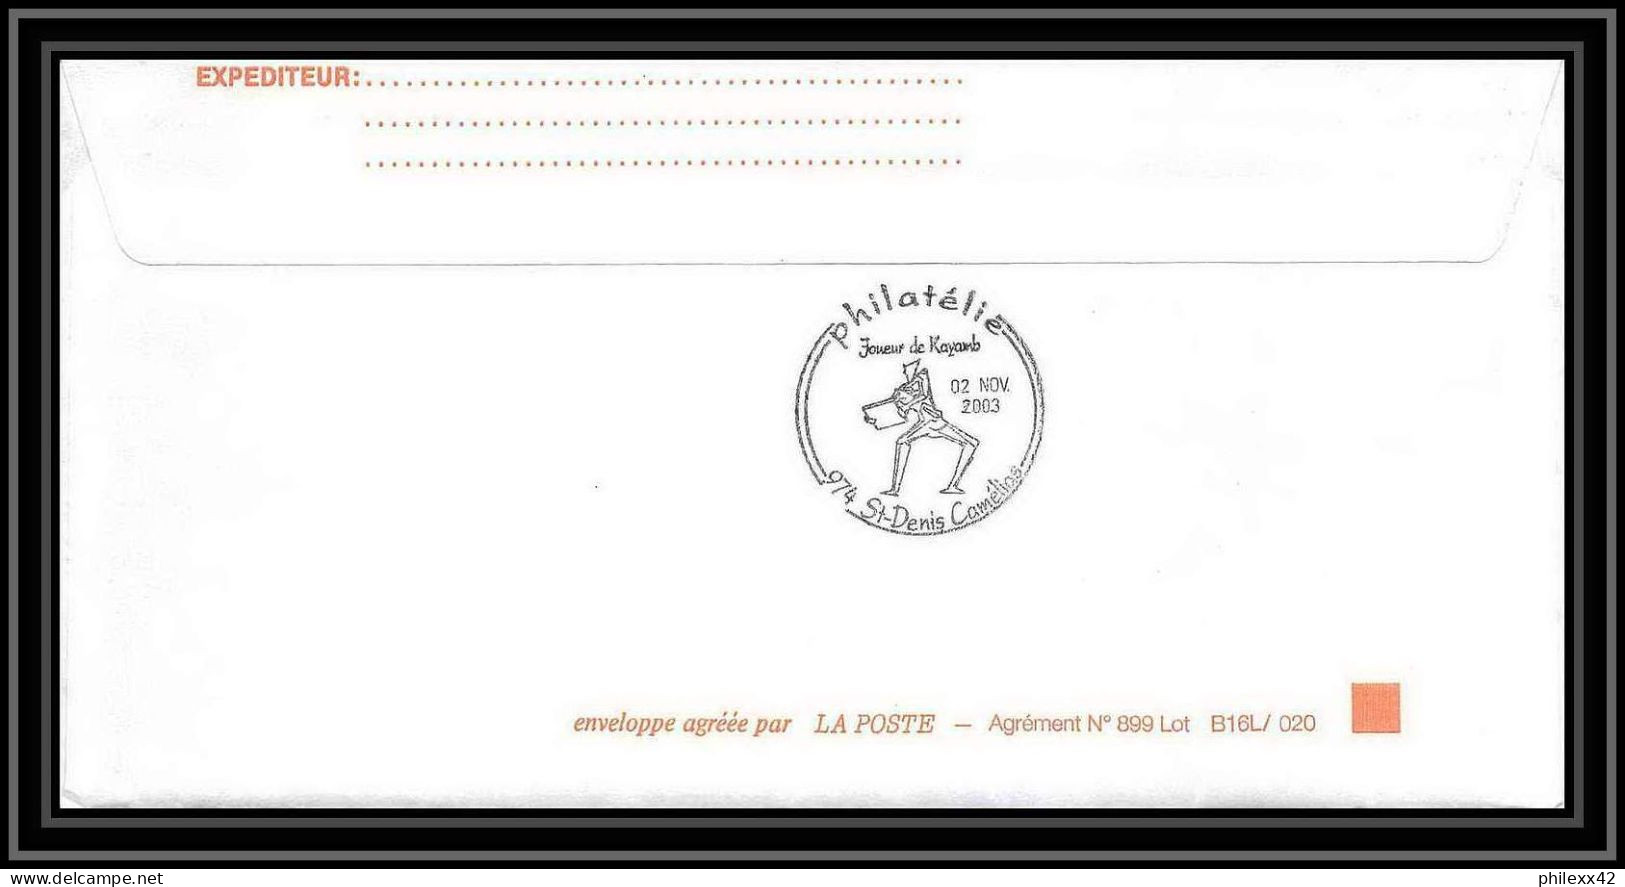 2416 Dufresne 2 Signé Signed Op 2003/3 N°363 12/11/2003 ANTARCTIC Terres Australes (taaf) Lettre Cover - Covers & Documents